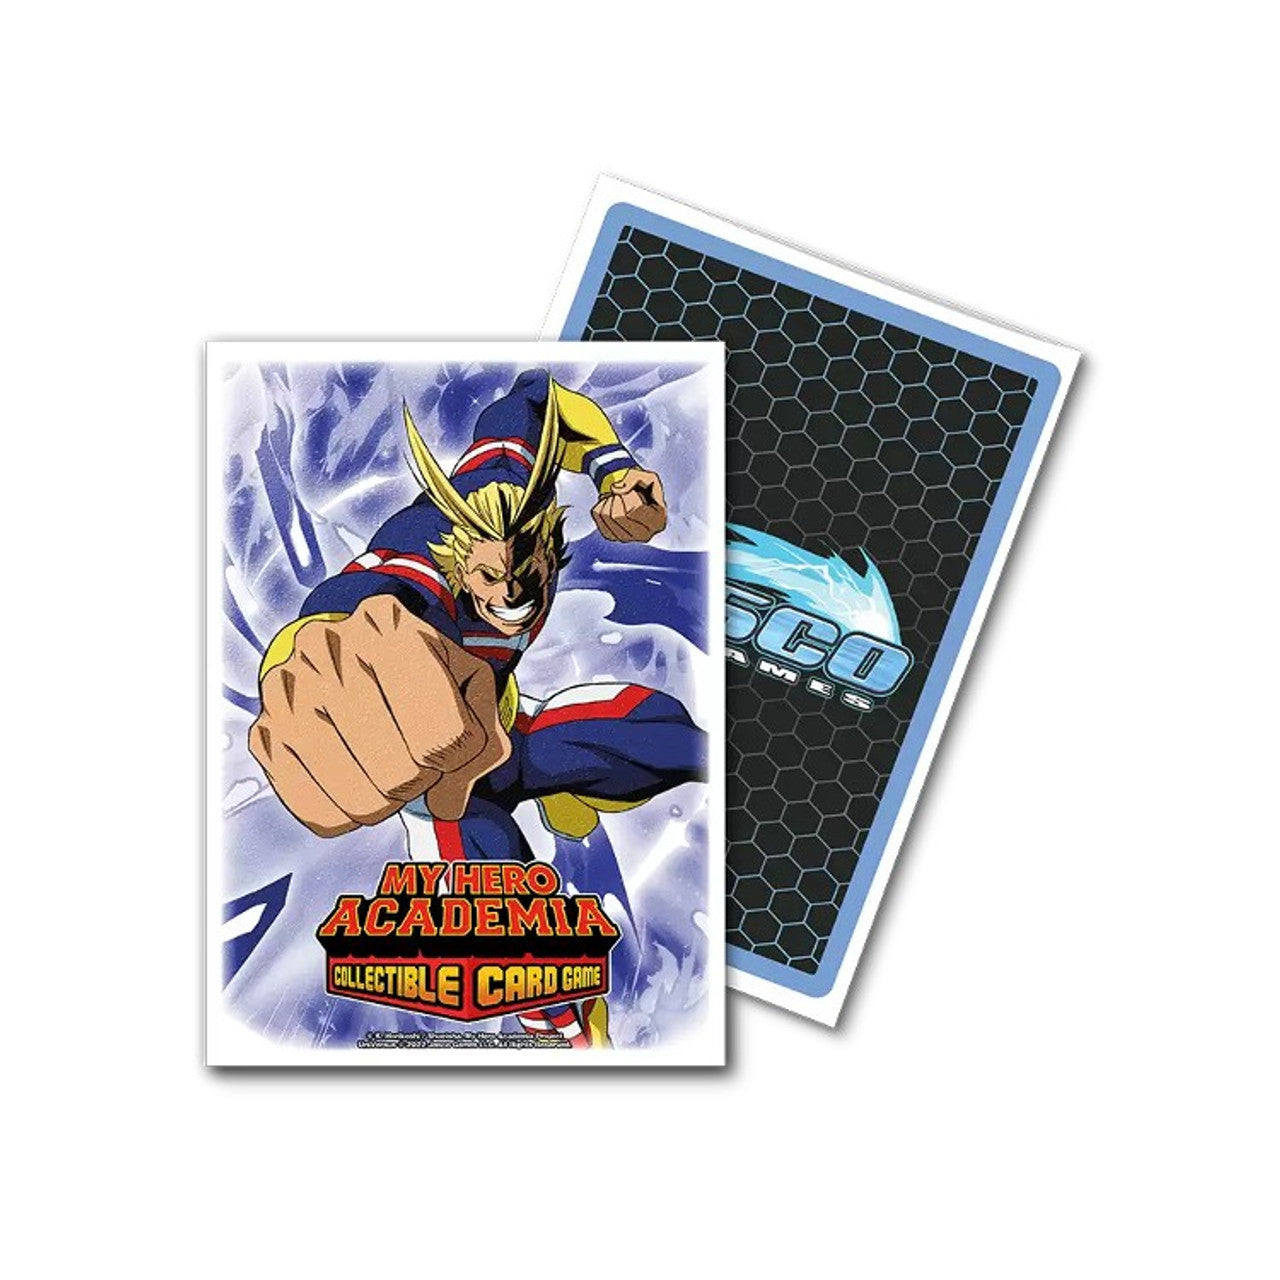 Dragon Shield Sleeve Art Matte My Hero Academia Standard Size 100pcs - All Might Punch-Dragon Shield-Ace Cards & Collectibles